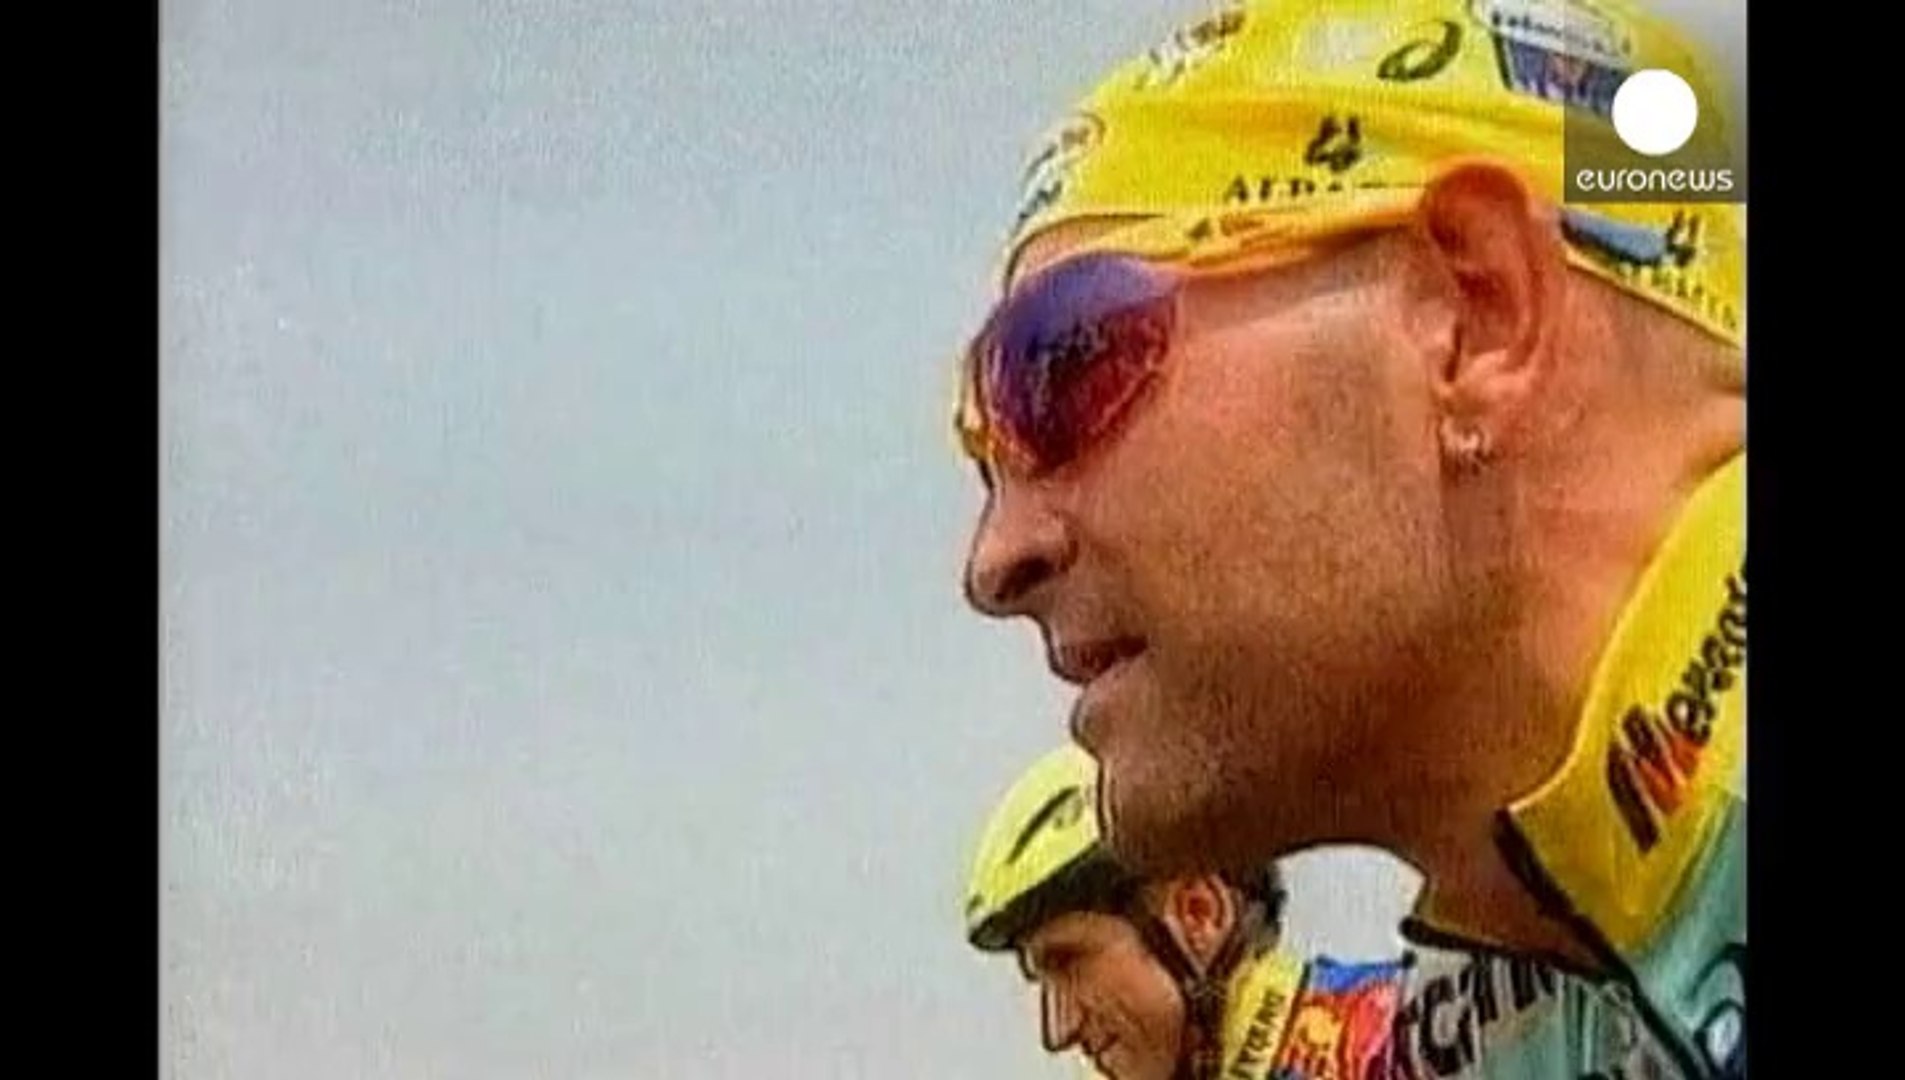 Investigation into death of cyclist Marco Pantani reopened amid murder claims